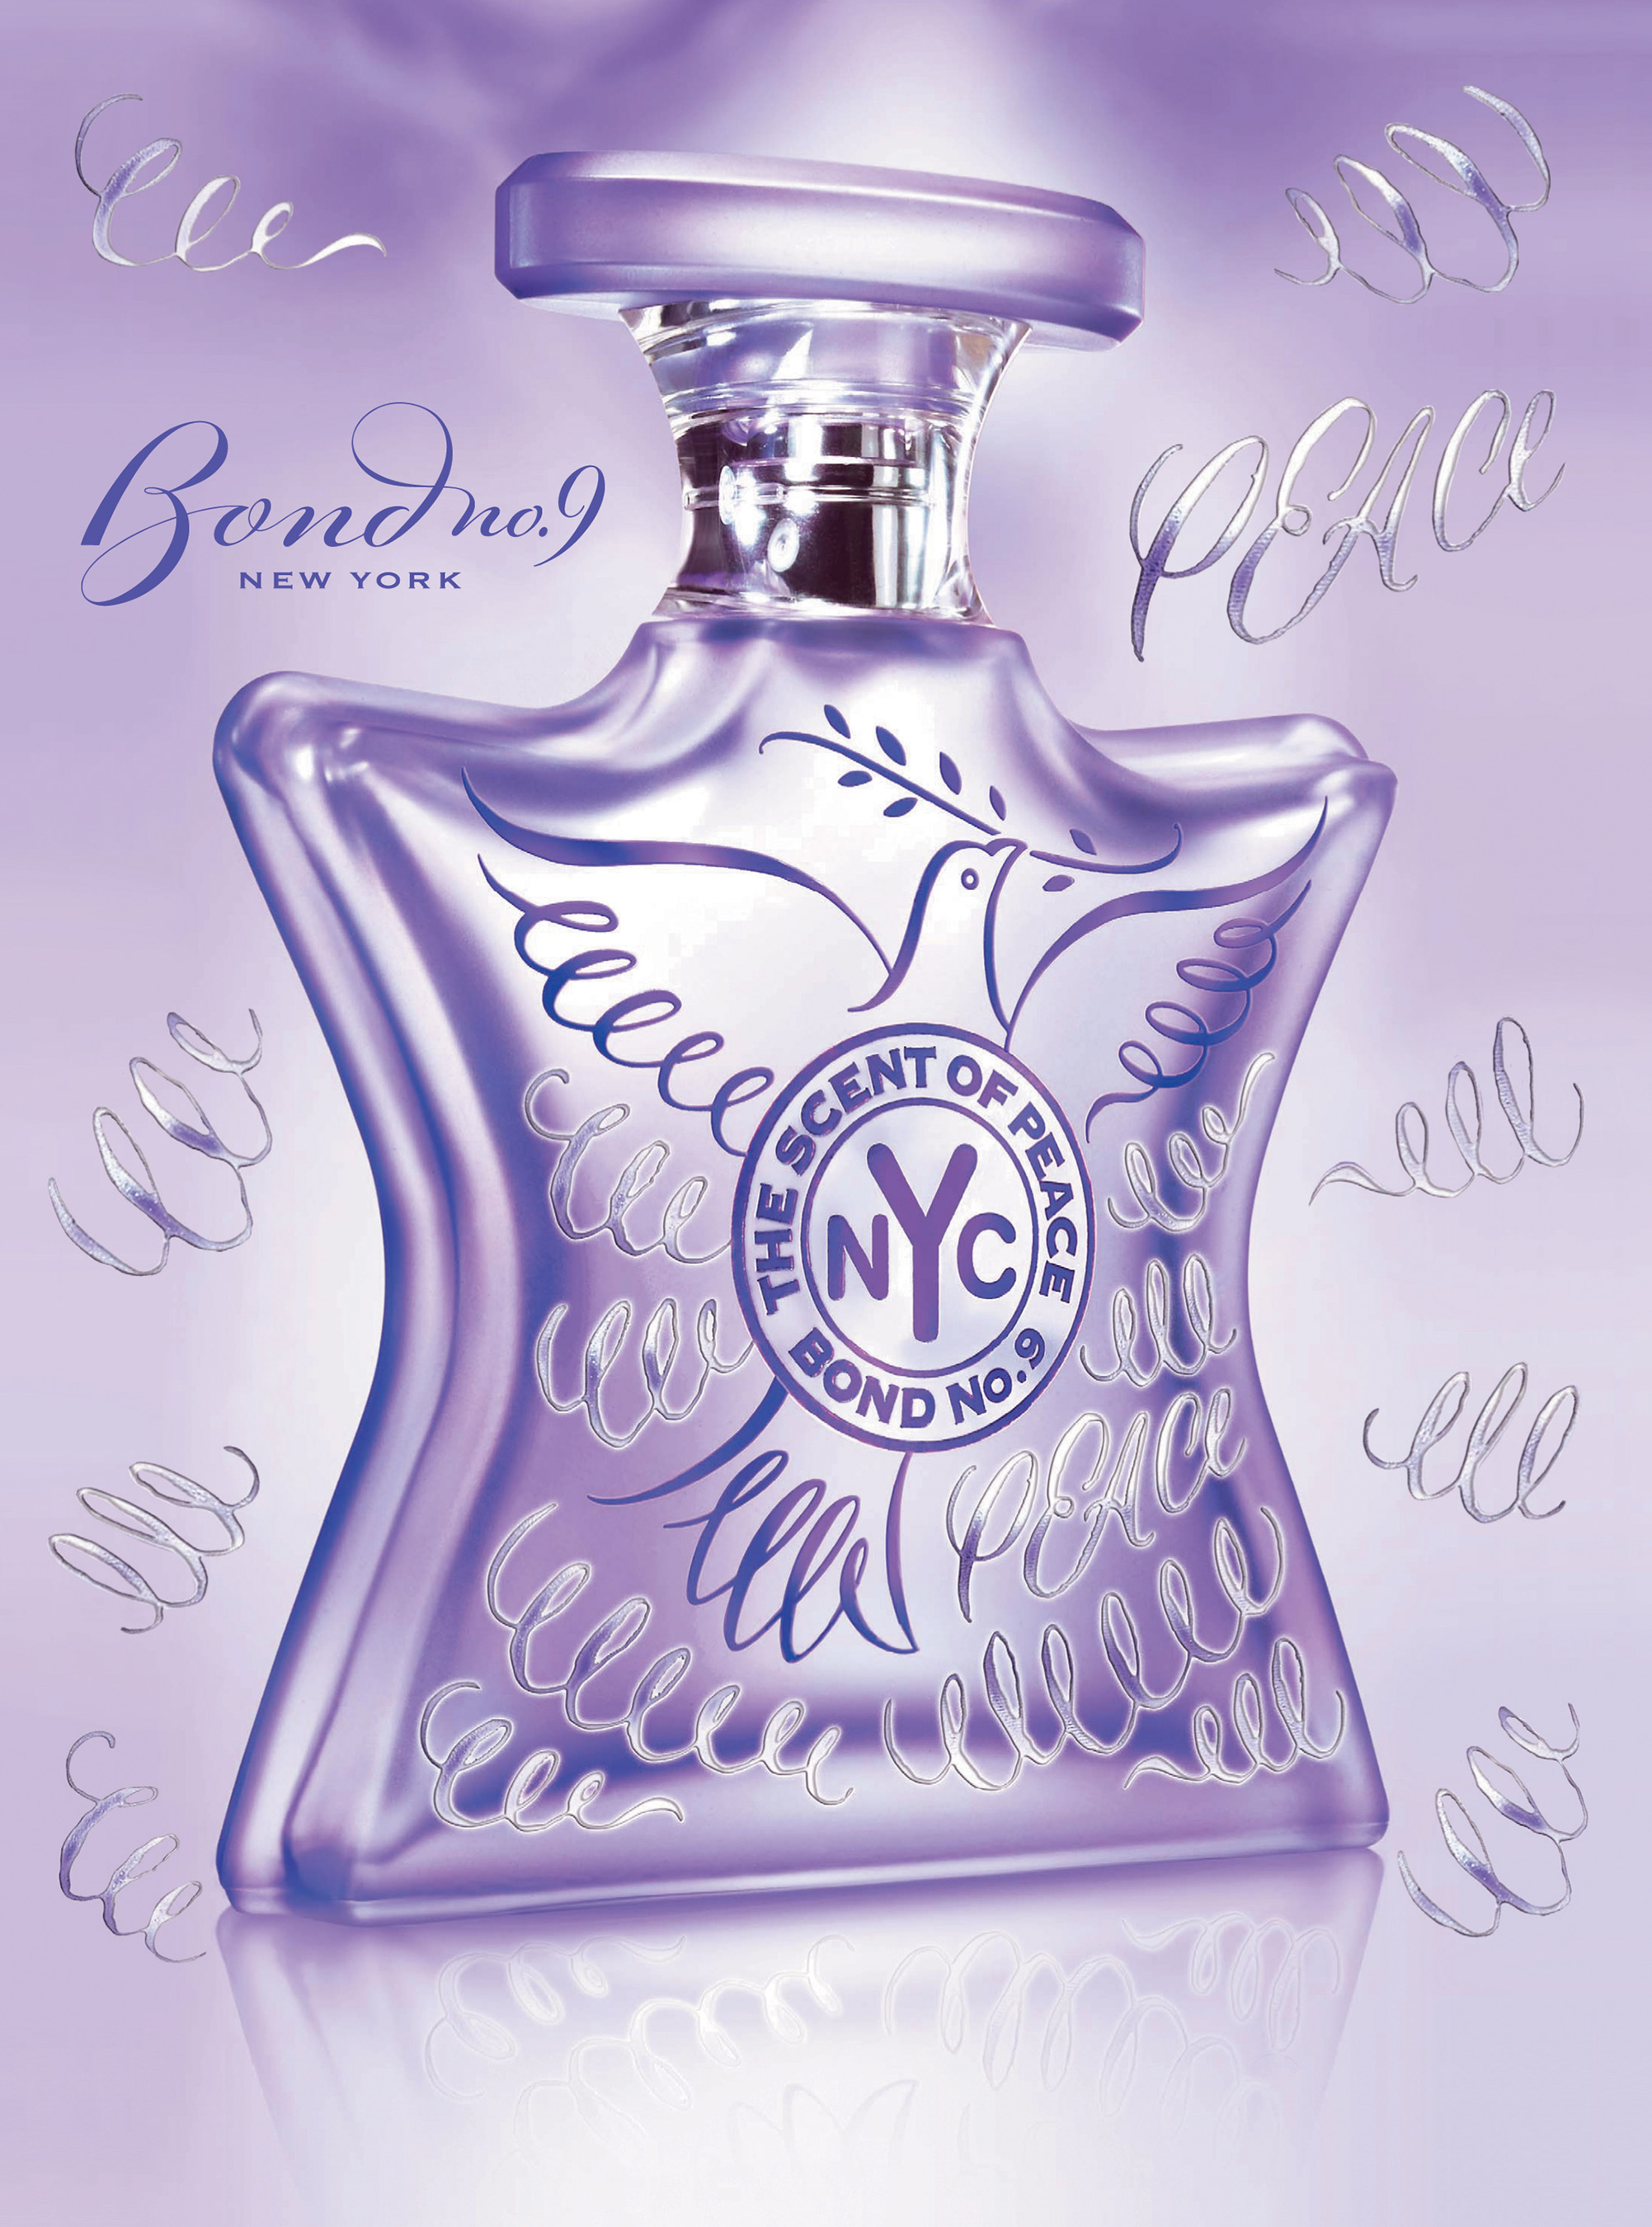 bond number 9 scent of peace for him